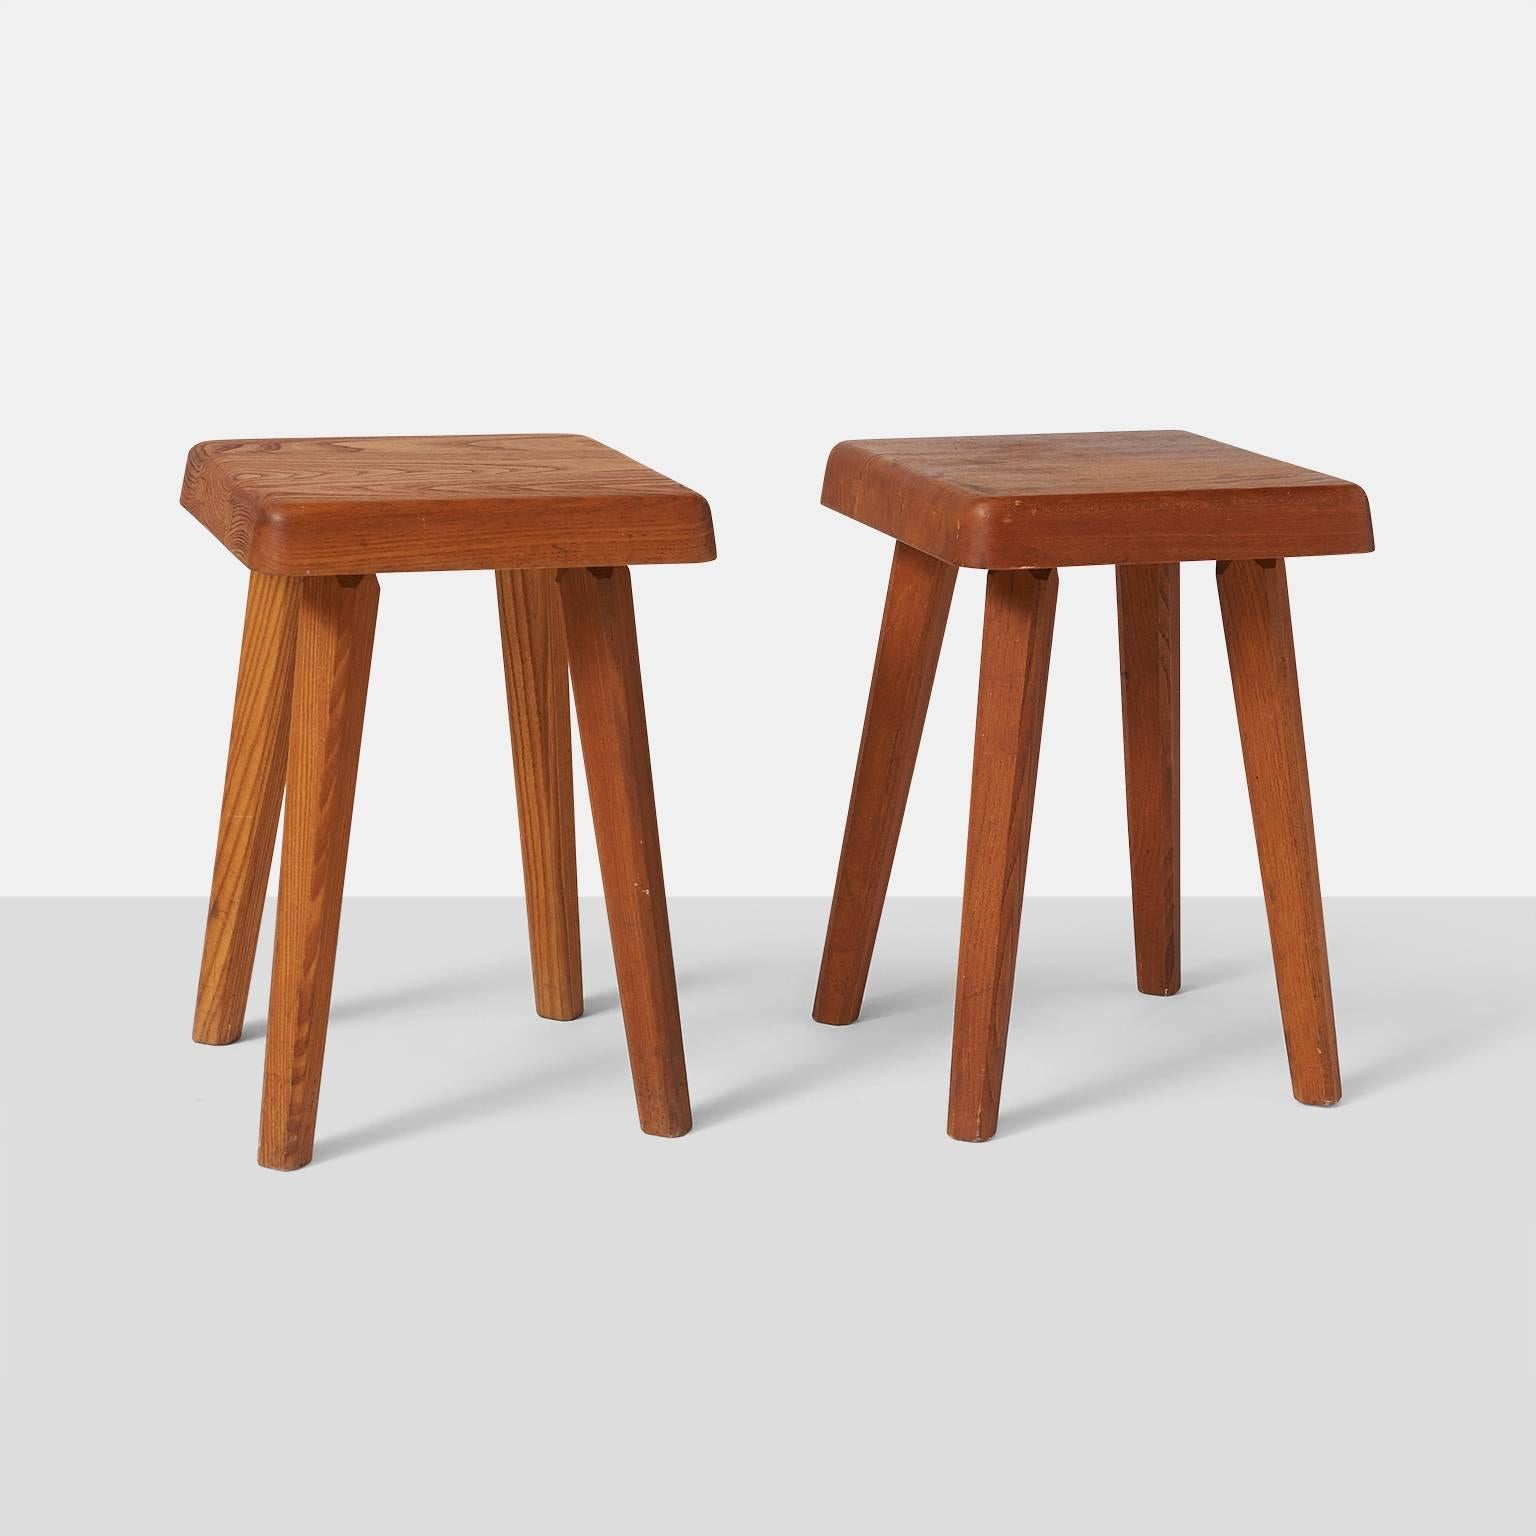 A pair of Pierre Chapo model S01A stools with a square seating. These pieces in the Campagne style are made of a rich dark and warm elm,
France, circa 1960s.